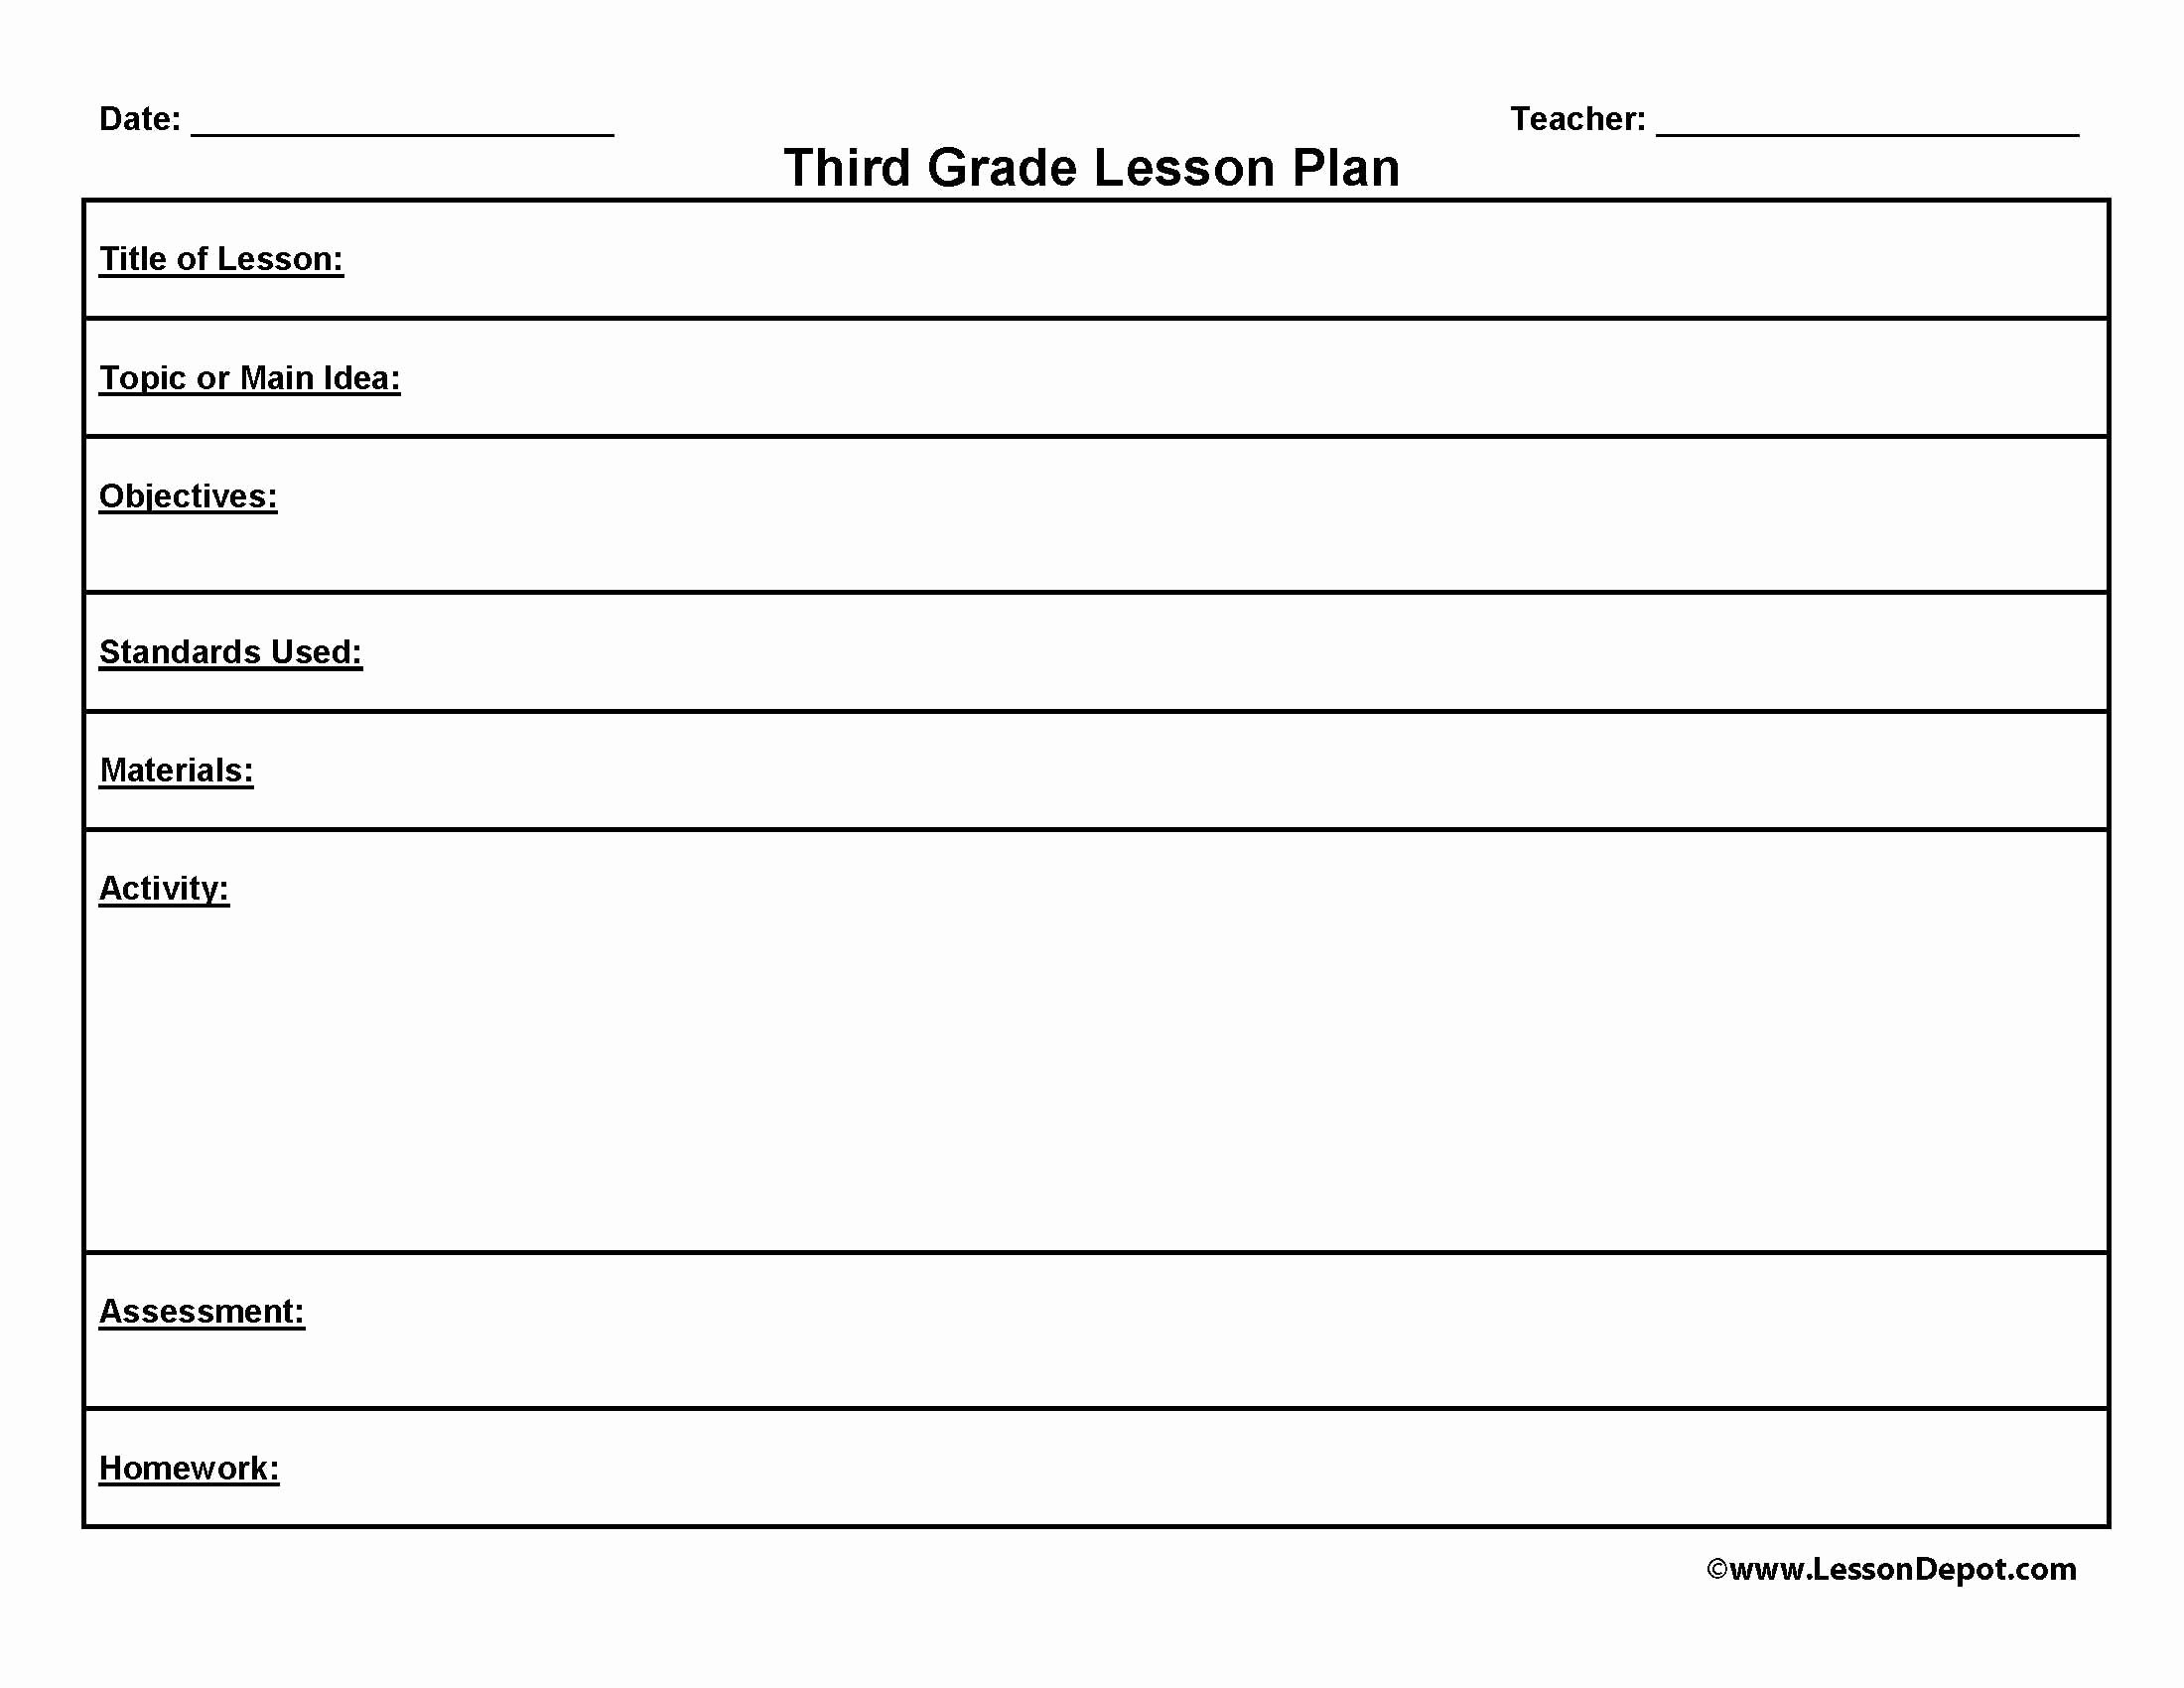 Social Studies Lesson Plan Templates Unique Third Grade Lesson Plan Template to Homeschool or Not to Homeschool